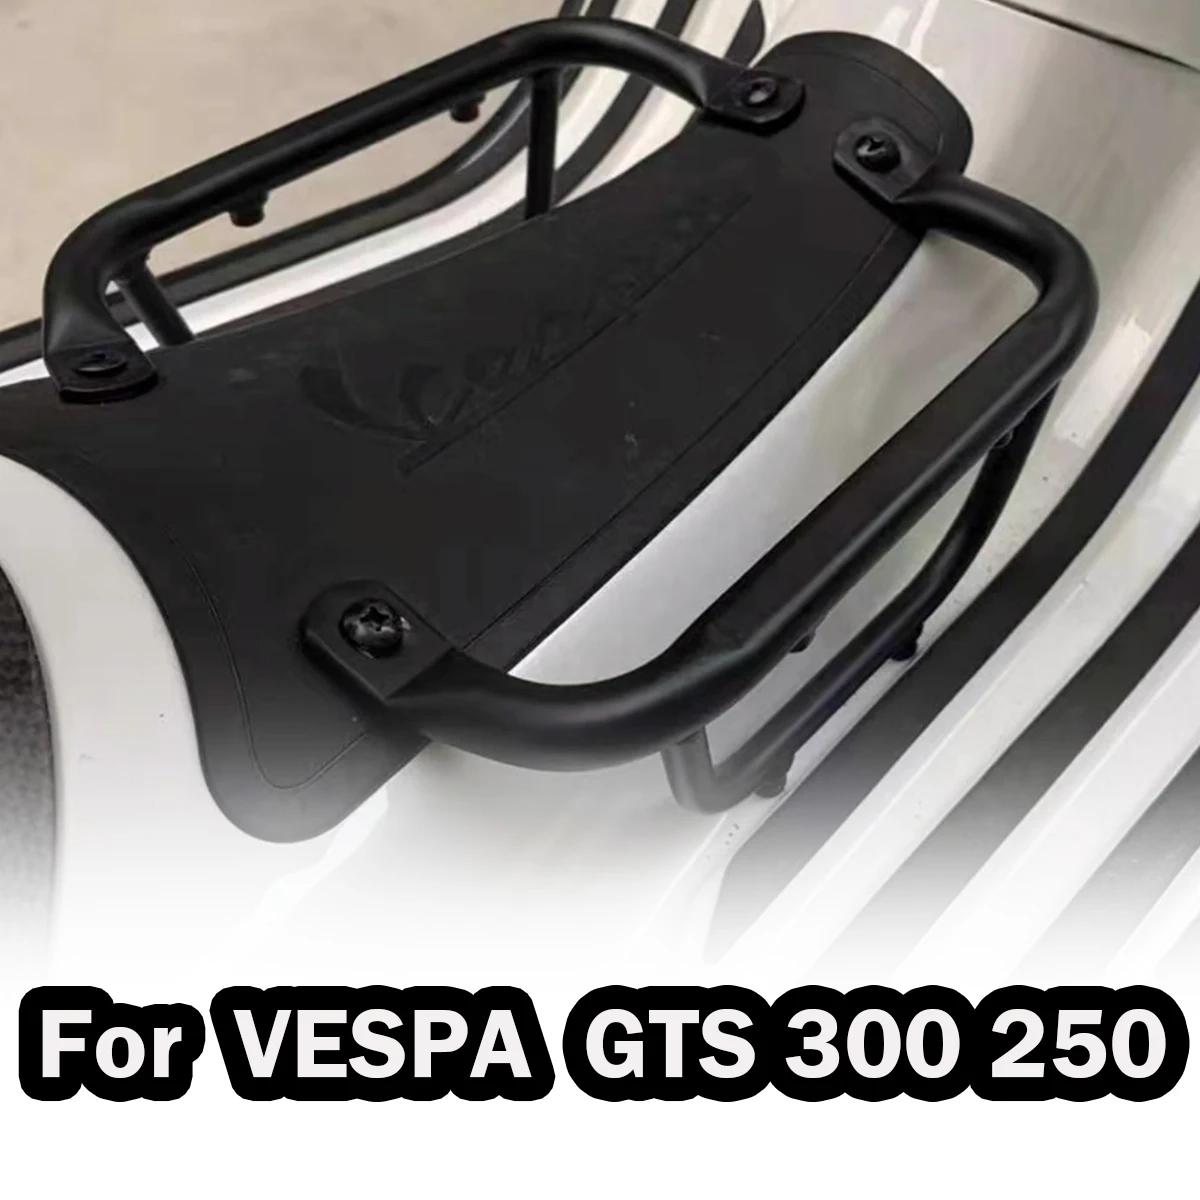 for-vespa-gts-300-250-125-gts300-gts250-2013-2022-2021-accessories-foot-pedal-mesh-luggage-rack-holder-bracket-carrier-support